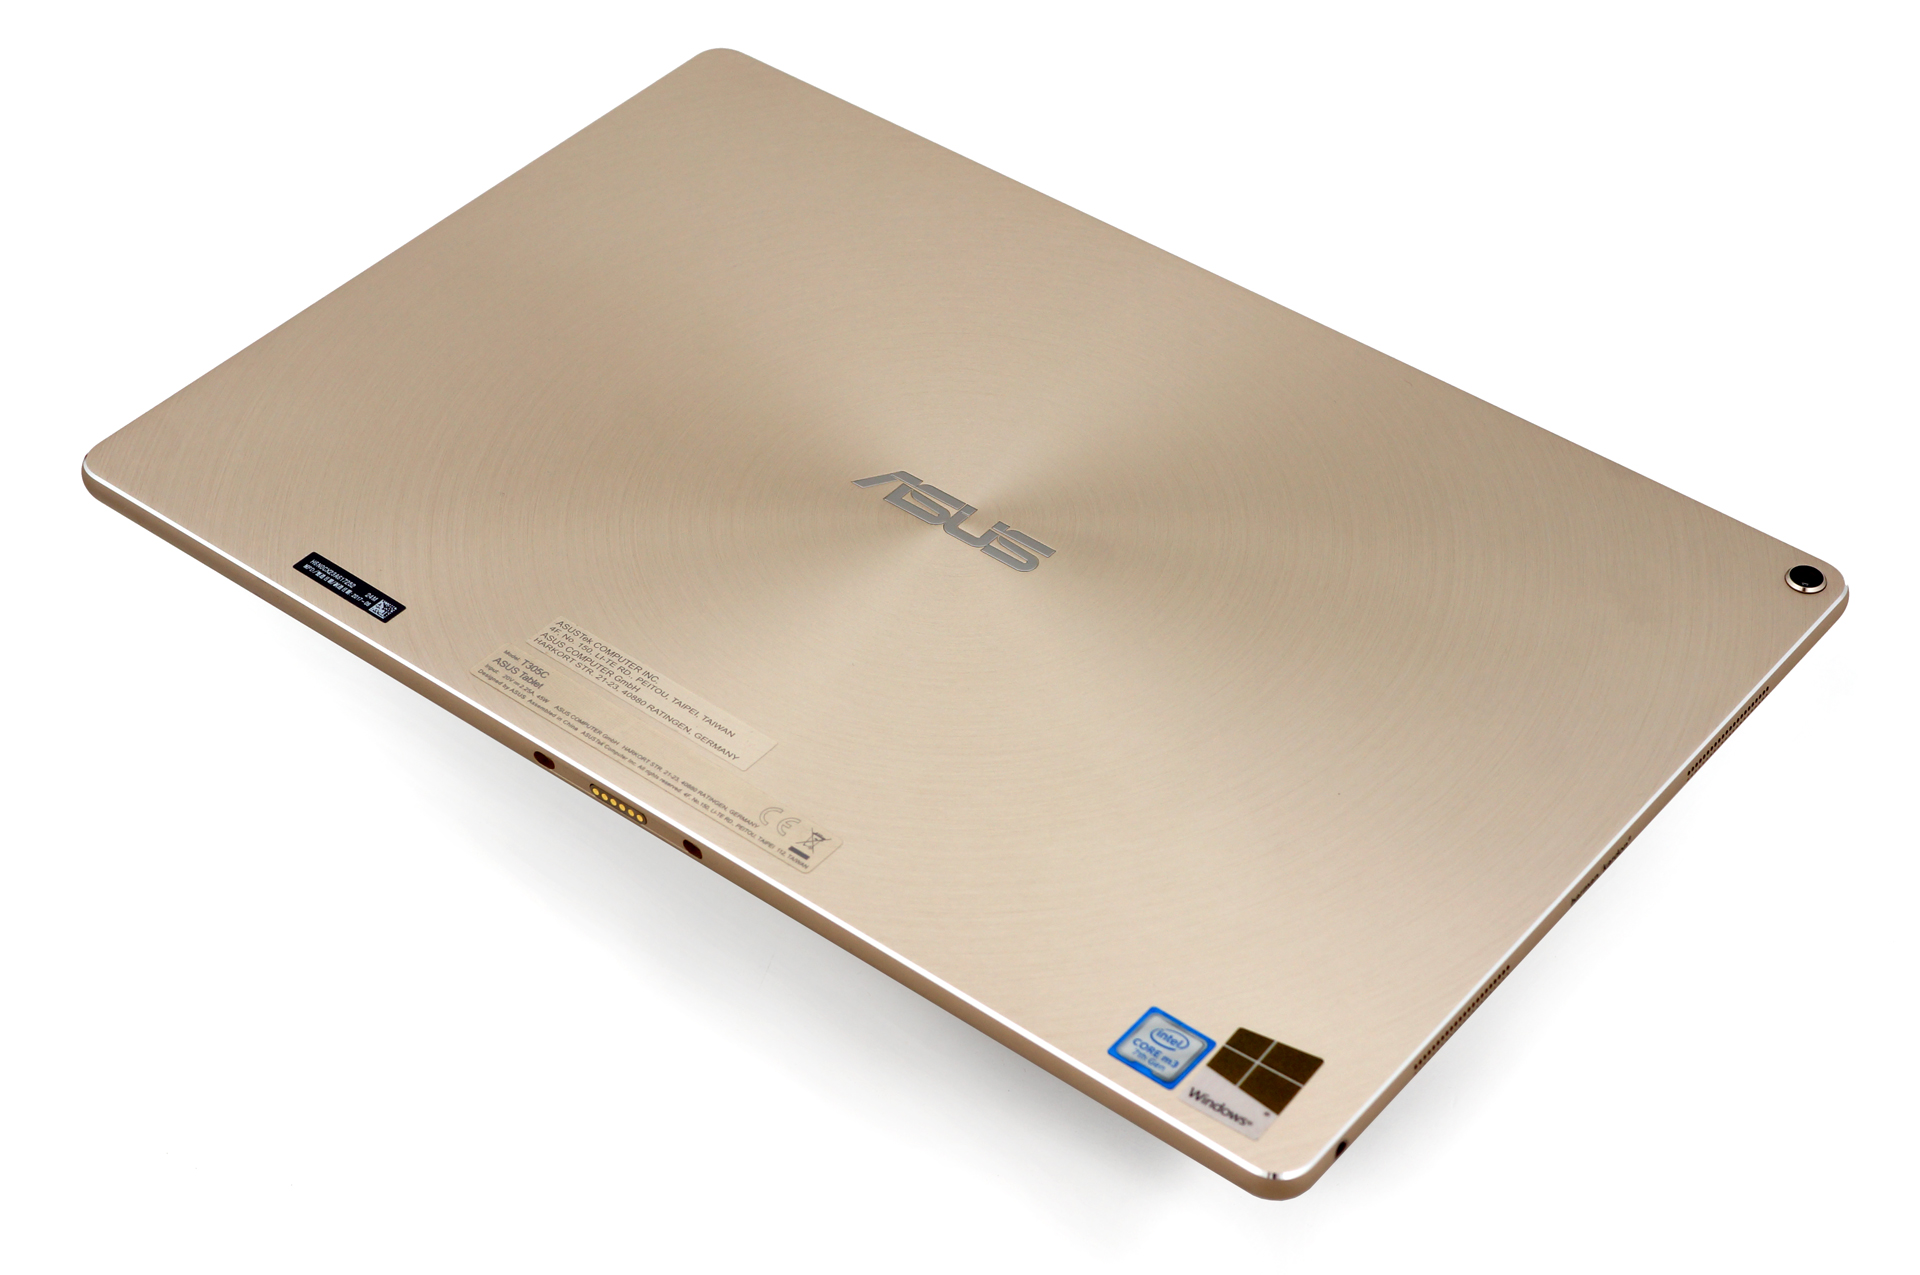 ASUS Transformer 3 T305CA review - the iPad Pro competitor with